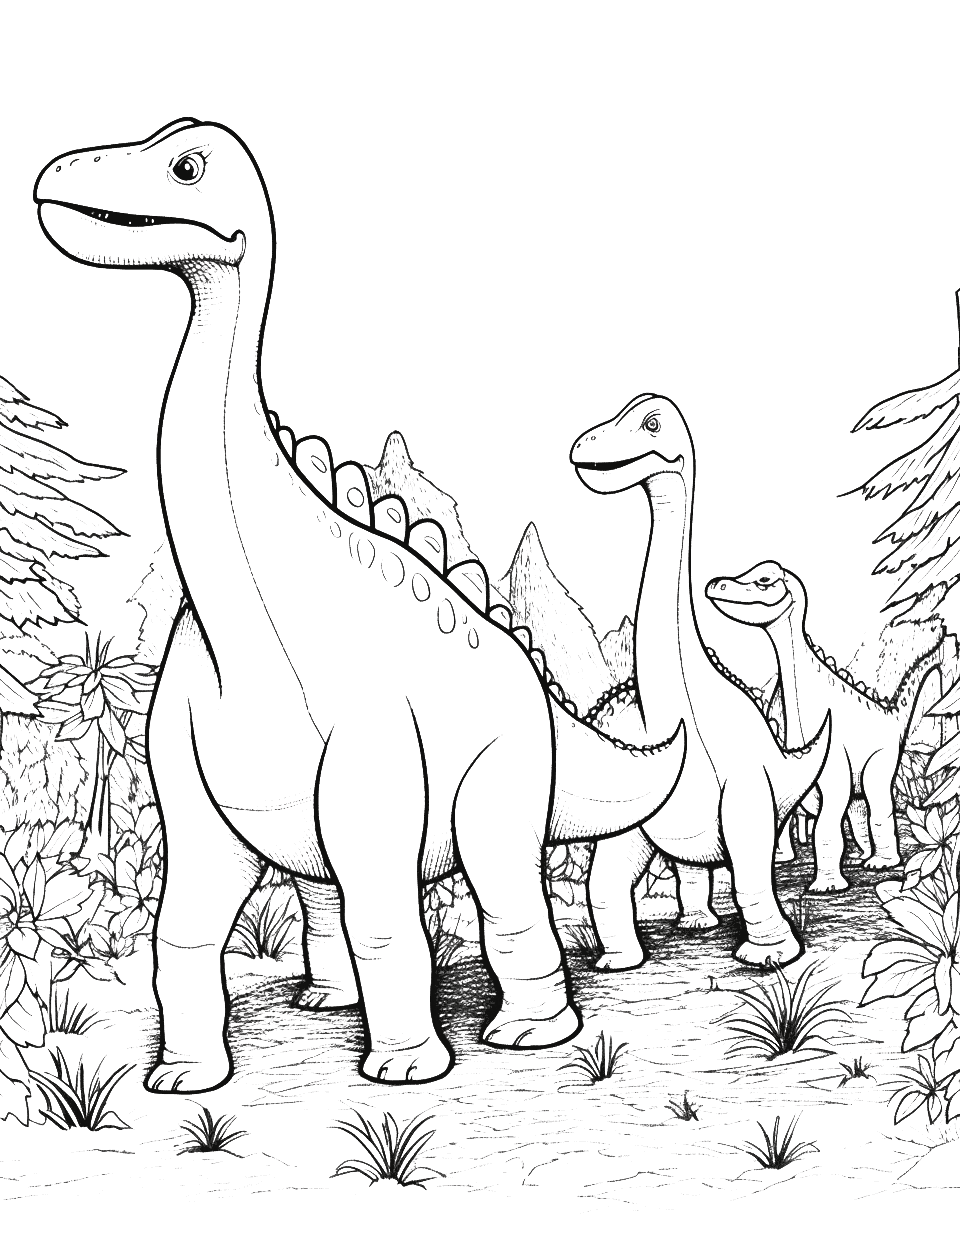 Parasaurolophus Parade Coloring Page - A parade of Parasaurolophus walking through the forest.